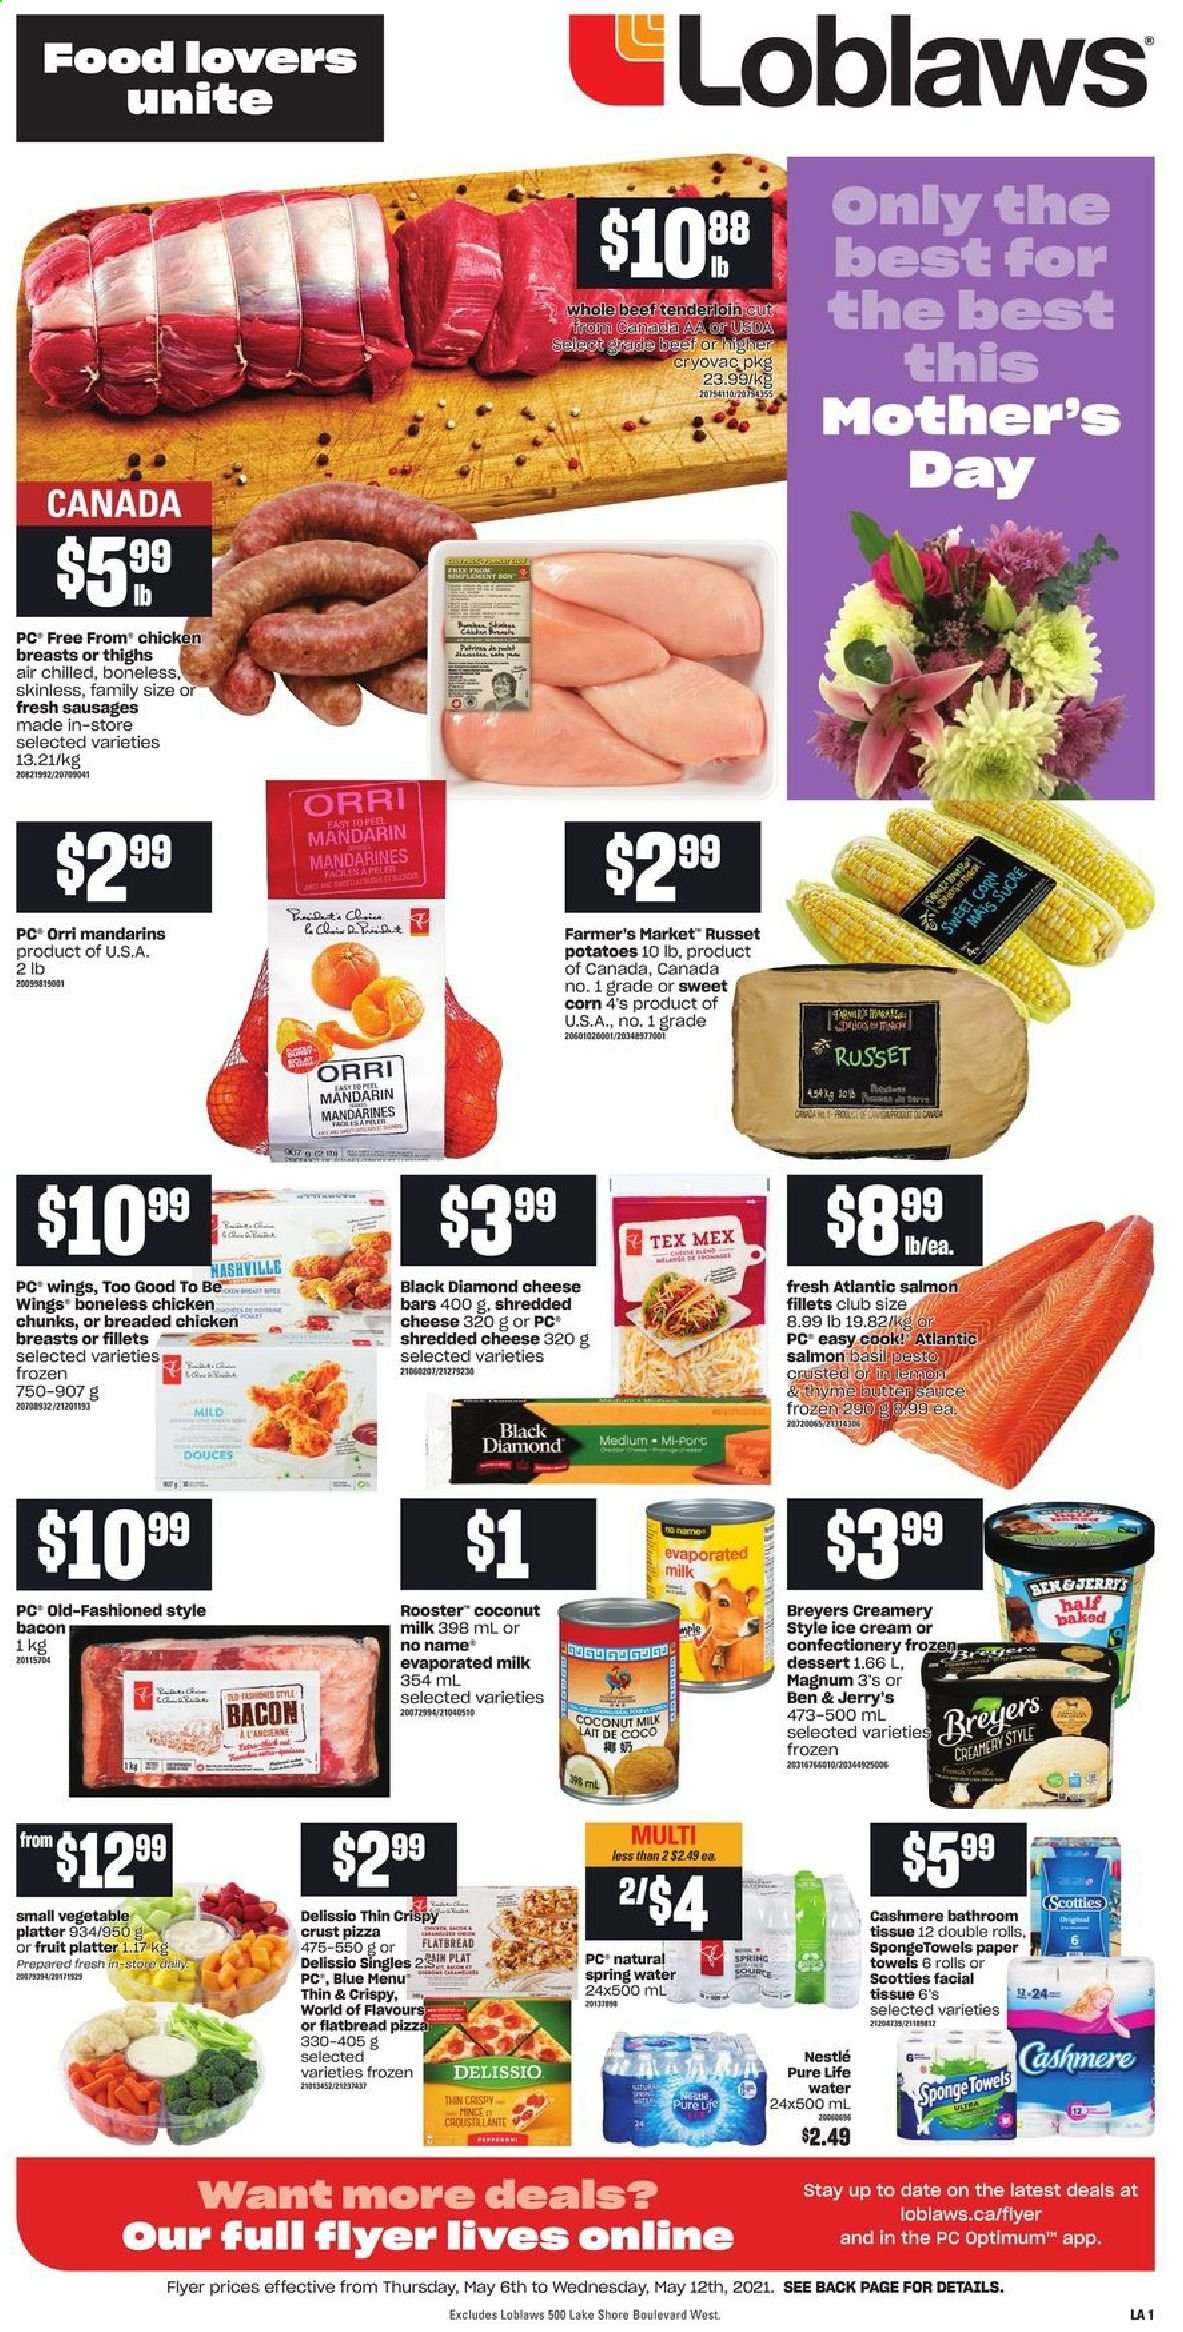 thumbnail - Loblaws Flyer - May 06, 2021 - May 12, 2021 - Sales products - flatbread, corn, russet potatoes, potatoes, sweet corn, mandarines, salmon, salmon fillet, No Name, pizza, sauce, fried chicken, bacon, sausage, shredded cheese, evaporated milk, butter, Magnum, ice cream, Ben & Jerry's, coconut milk, basil pesto, spring water, Pure Life Water, beef meat, beef tenderloin, bath tissue, kitchen towels, paper towels, Optimum, Nestlé. Page 1.